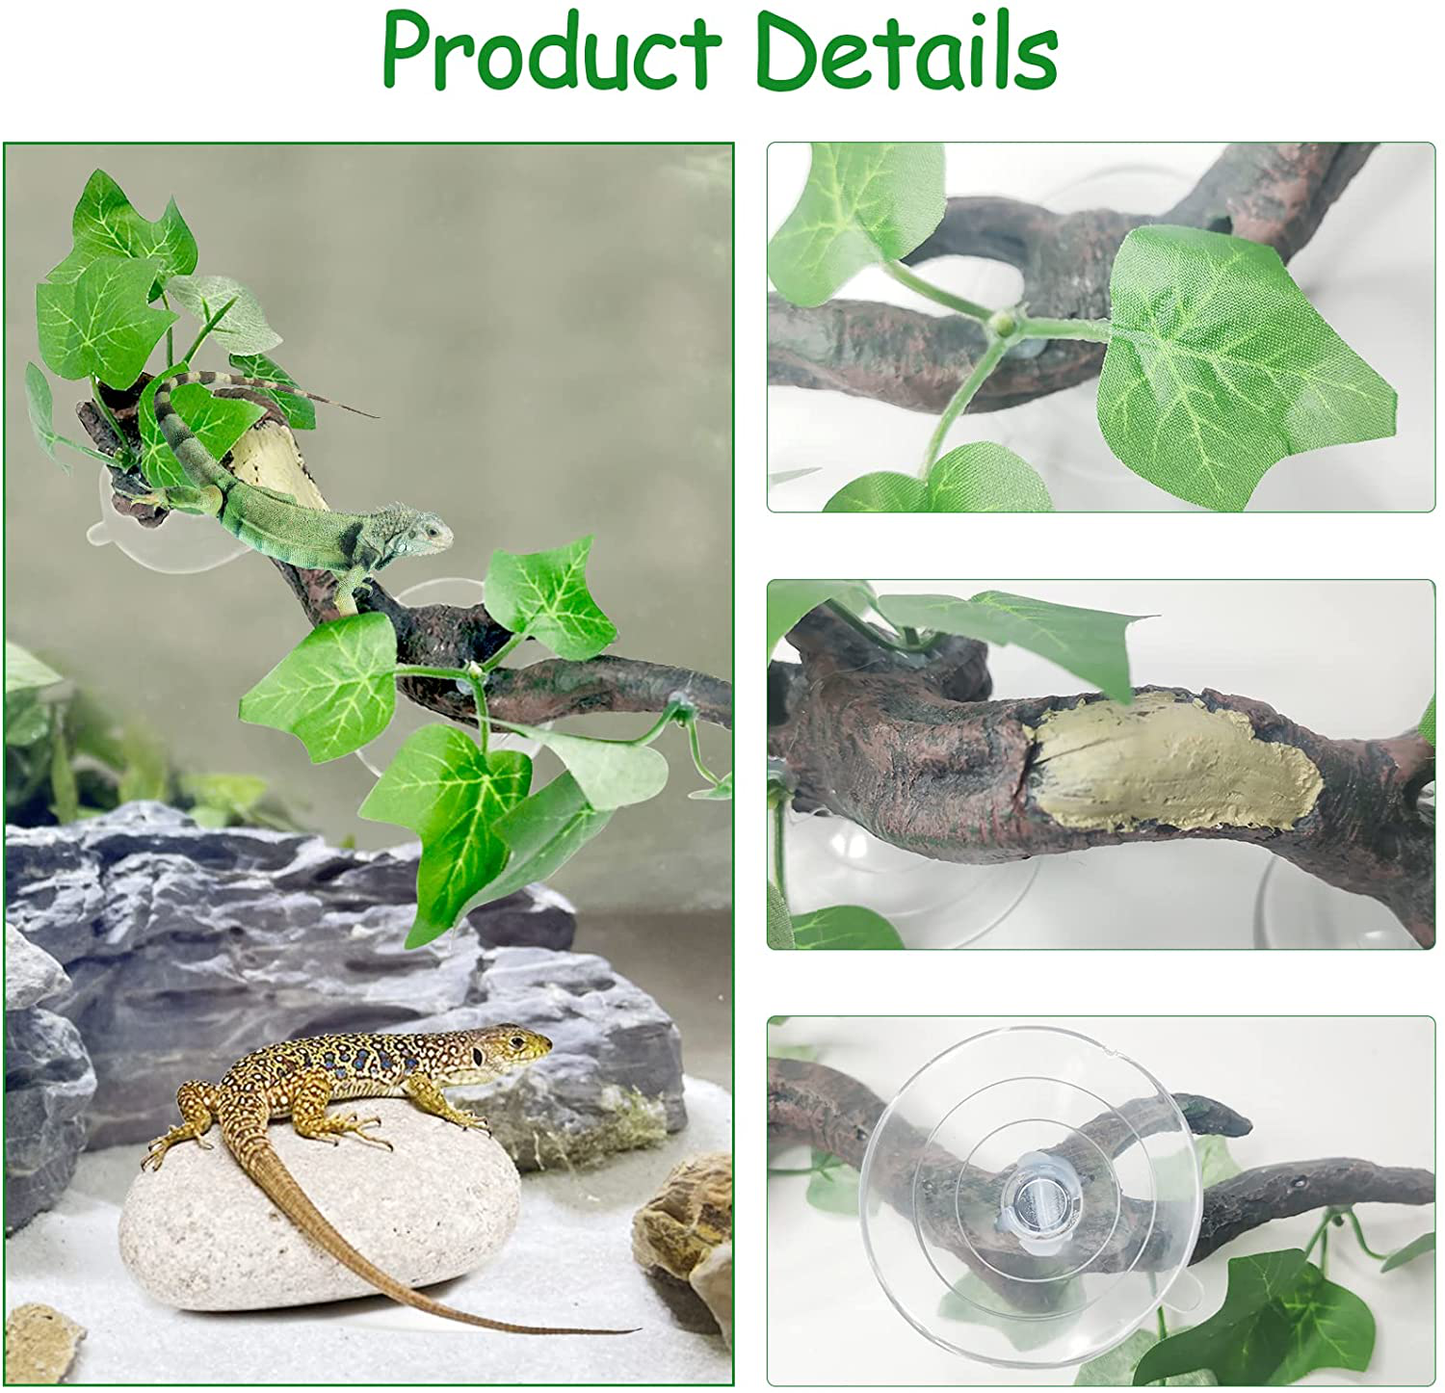 Fhiny Reptile Corner Branch, Resin Climb Tree Branch Decor with Leaves Tank Accessories Terrarium Plant Ornament with Suction Cup for Snake Lizard Bearded Dragons Gecko Climbing